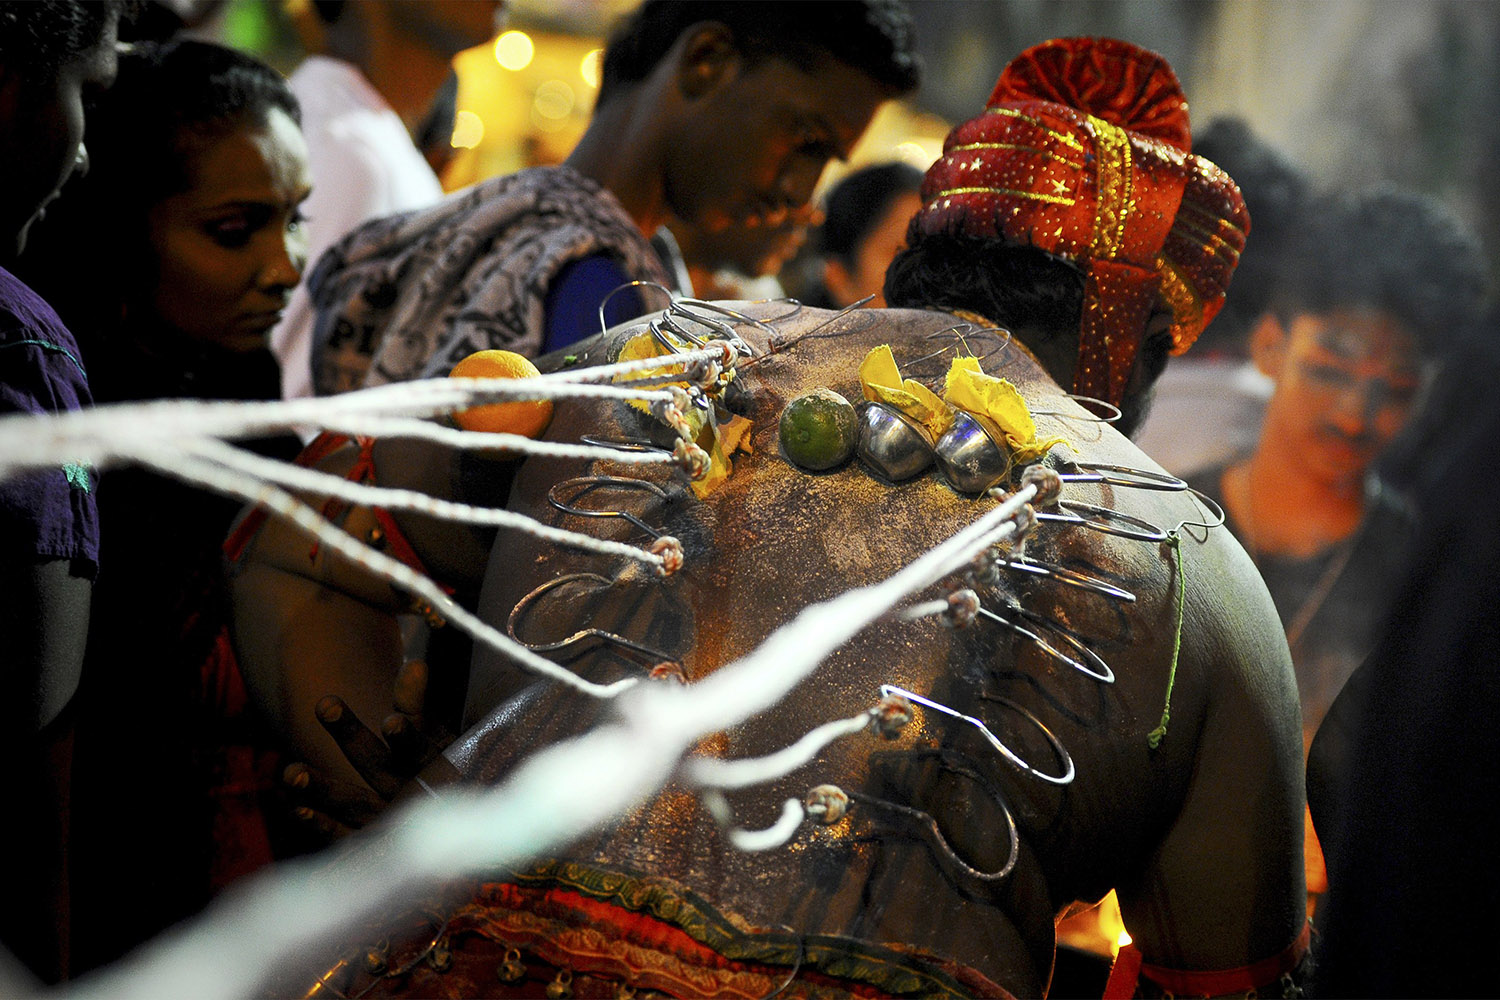 Jan. 17, 2014. A Hindu devotee having hooks embedded in his back prepares for his pilgrimage climb up the stairs of Batu Caves temple during the Thaipusam festival in Kuala Lumpur, Malaysia.